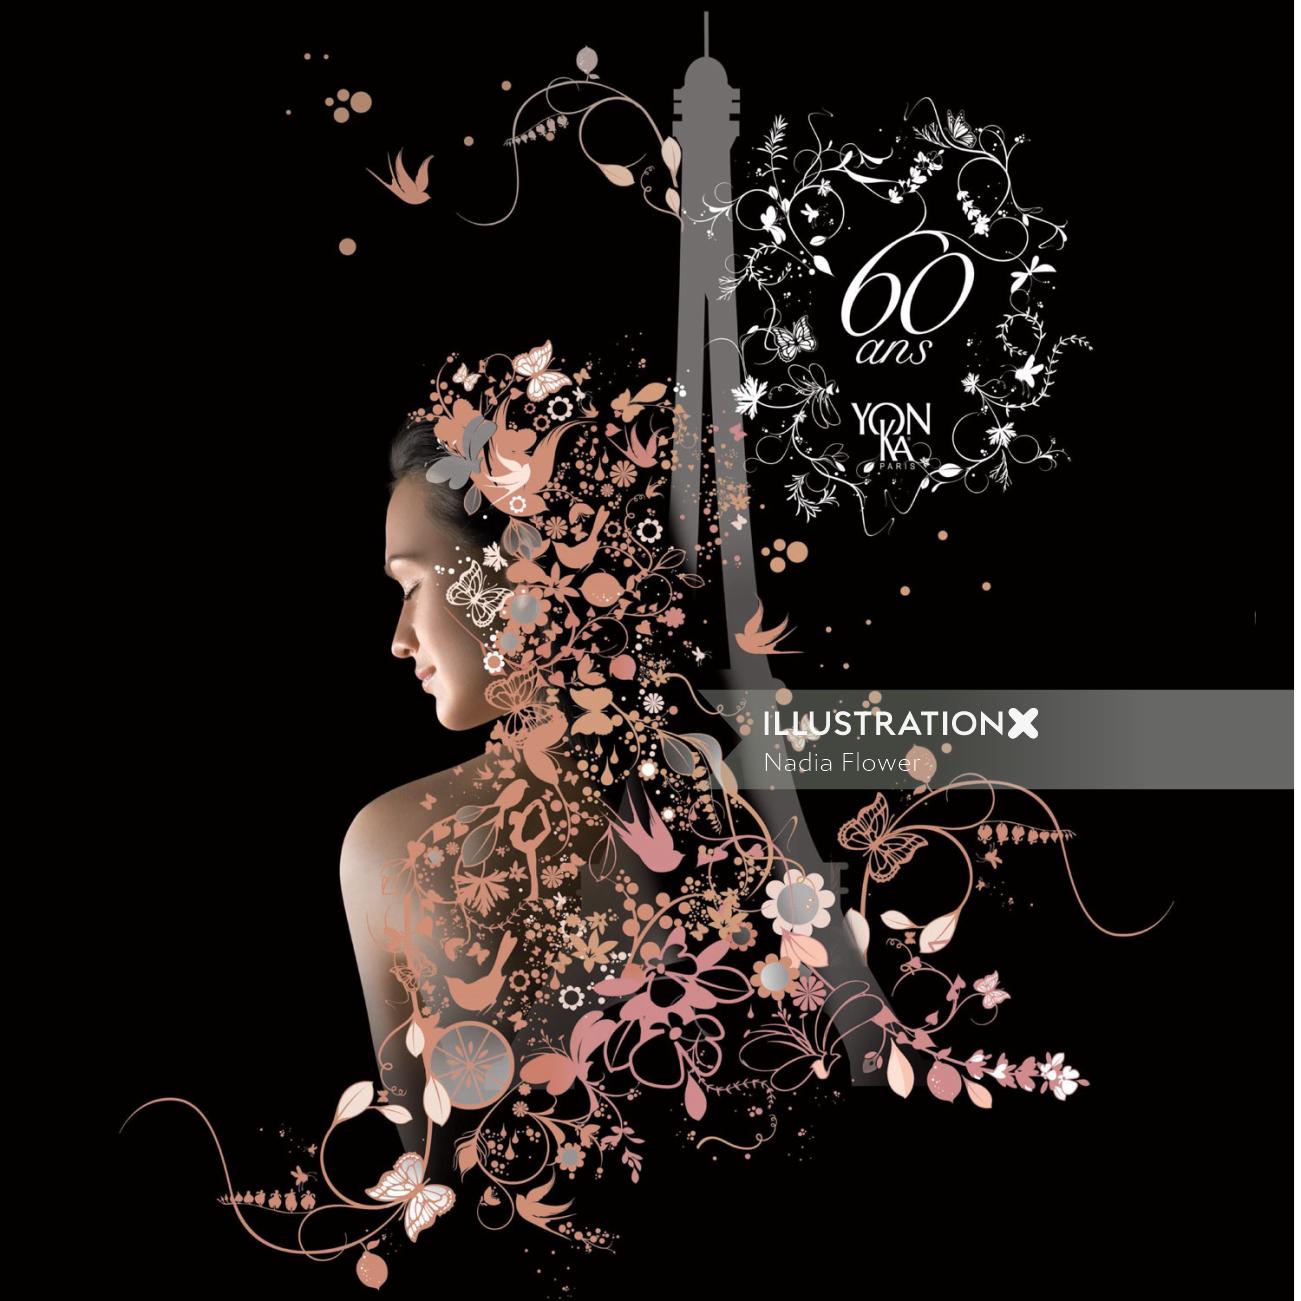 Fashion model with flower graphics